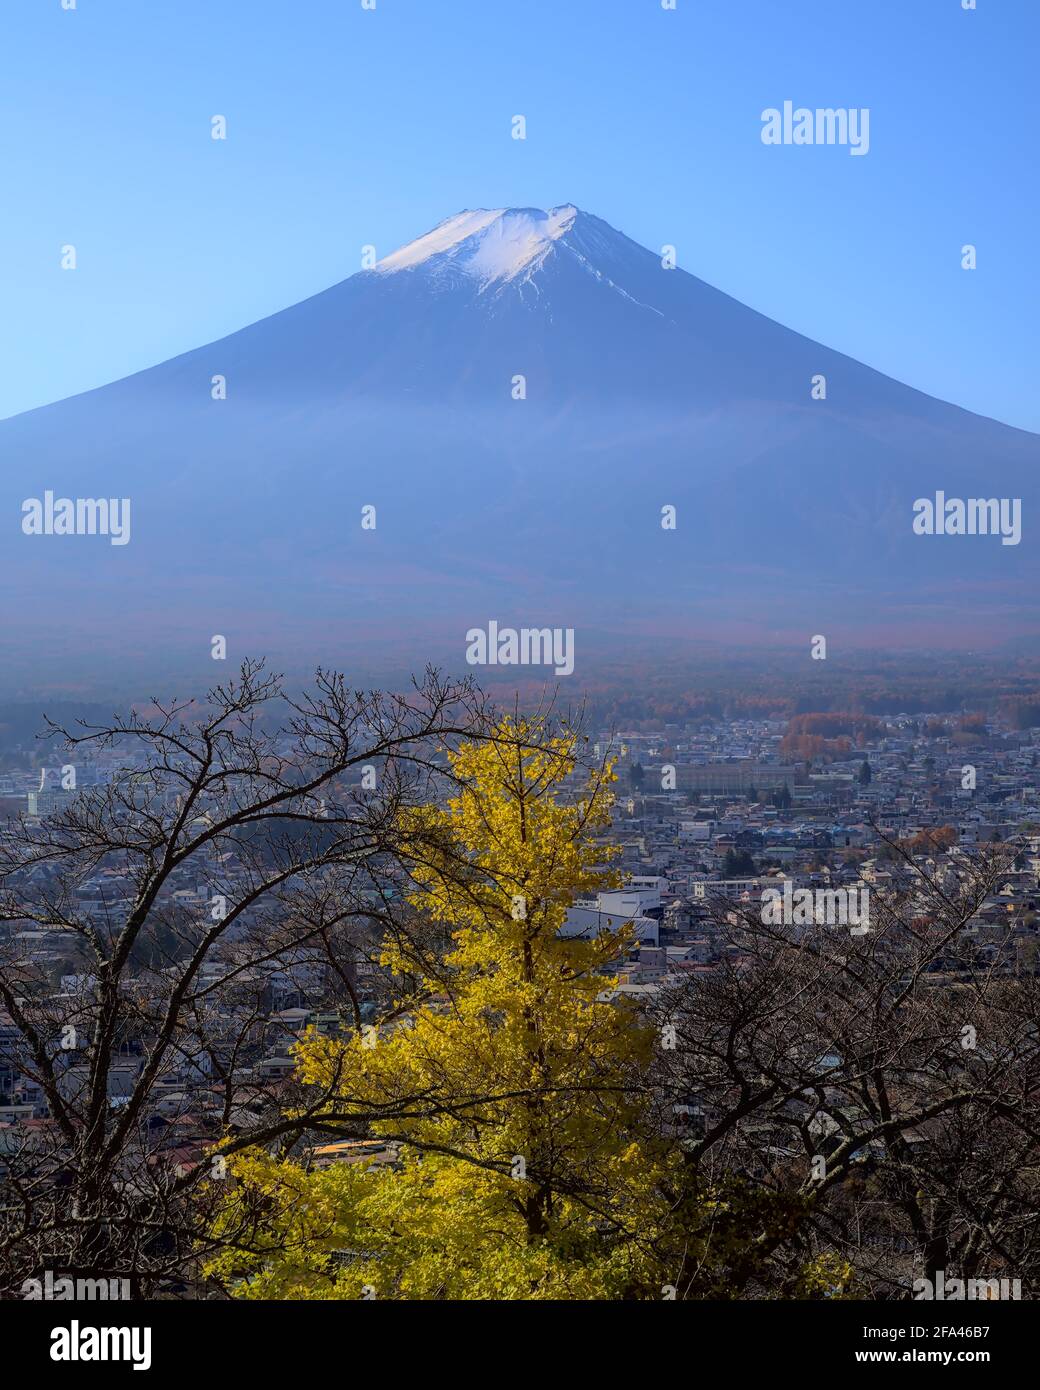 Daytime view of Mount Fuji and a bright yellow ginkgo tree in autumn under a clear blue sky, with part of the city of Fujiyoshida visible Stock Photo